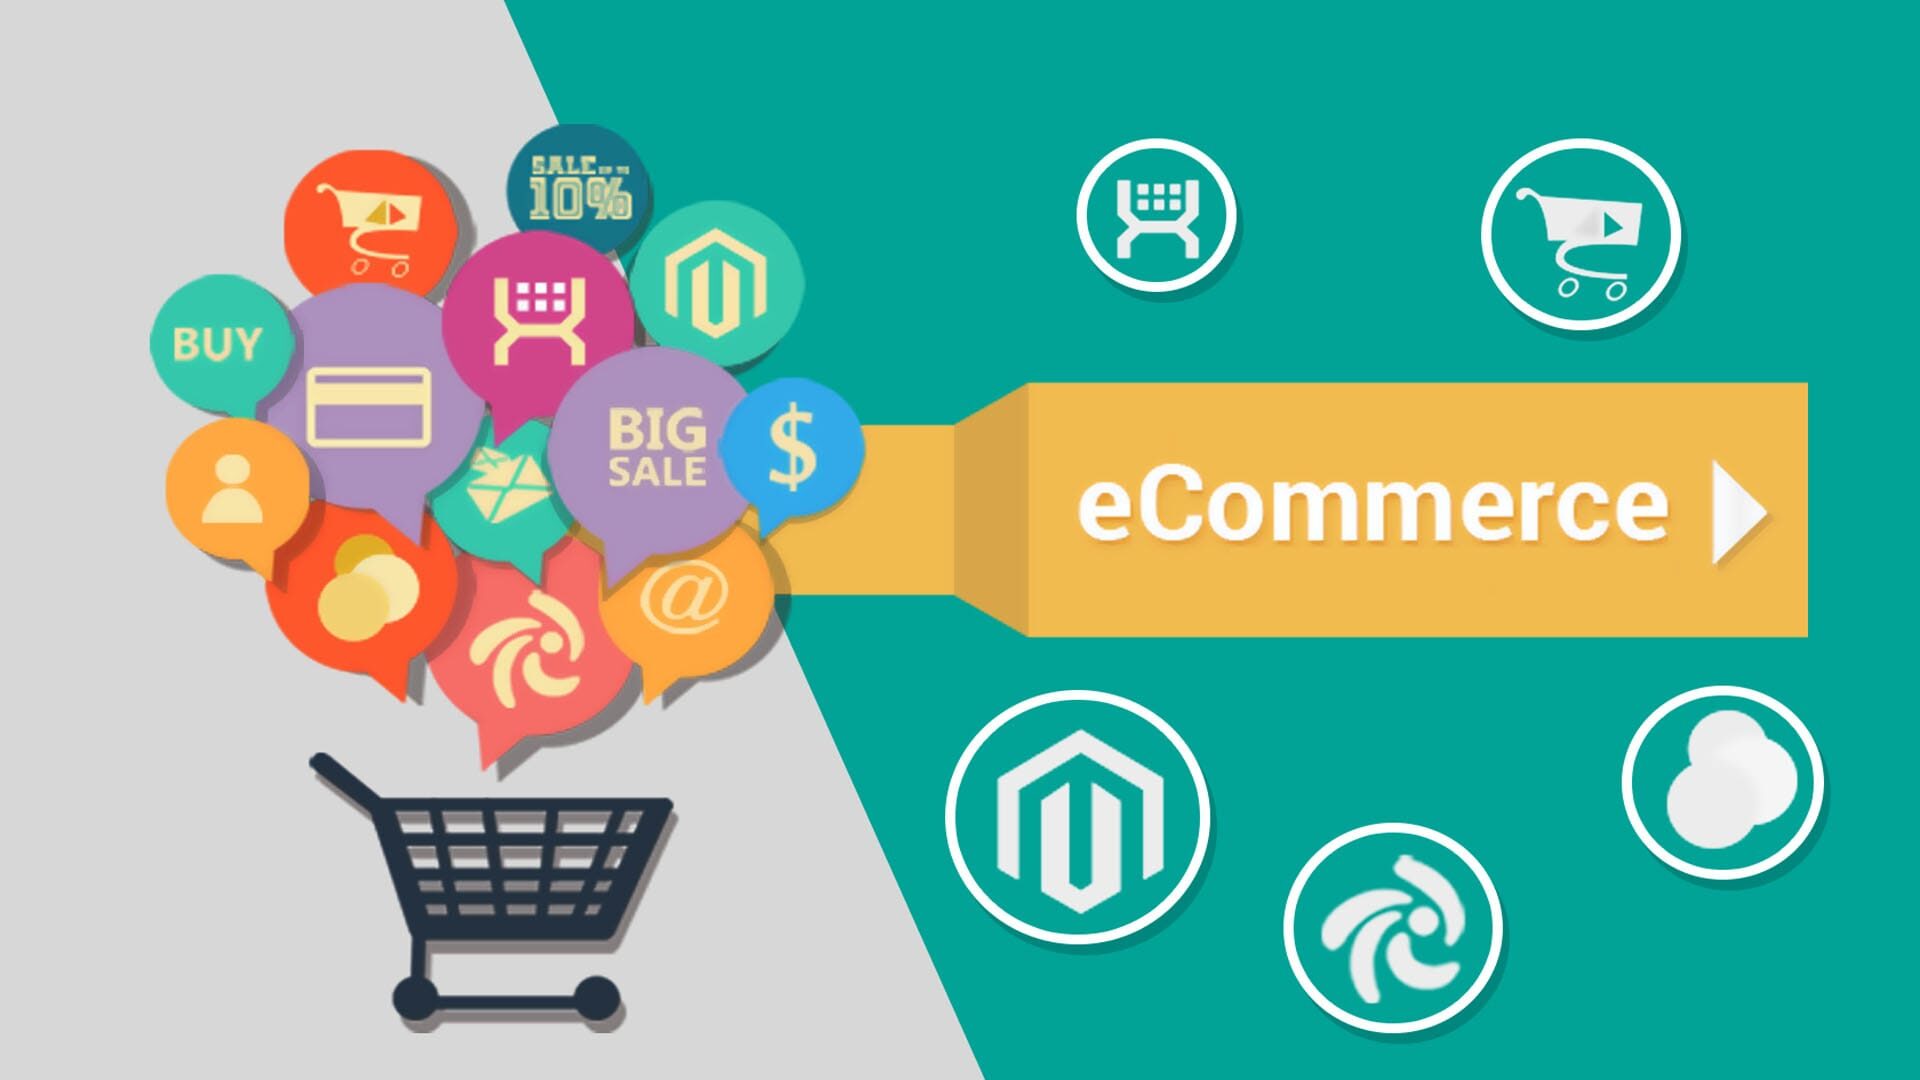 Best eCommerce Consulting Services in London – RVS Media